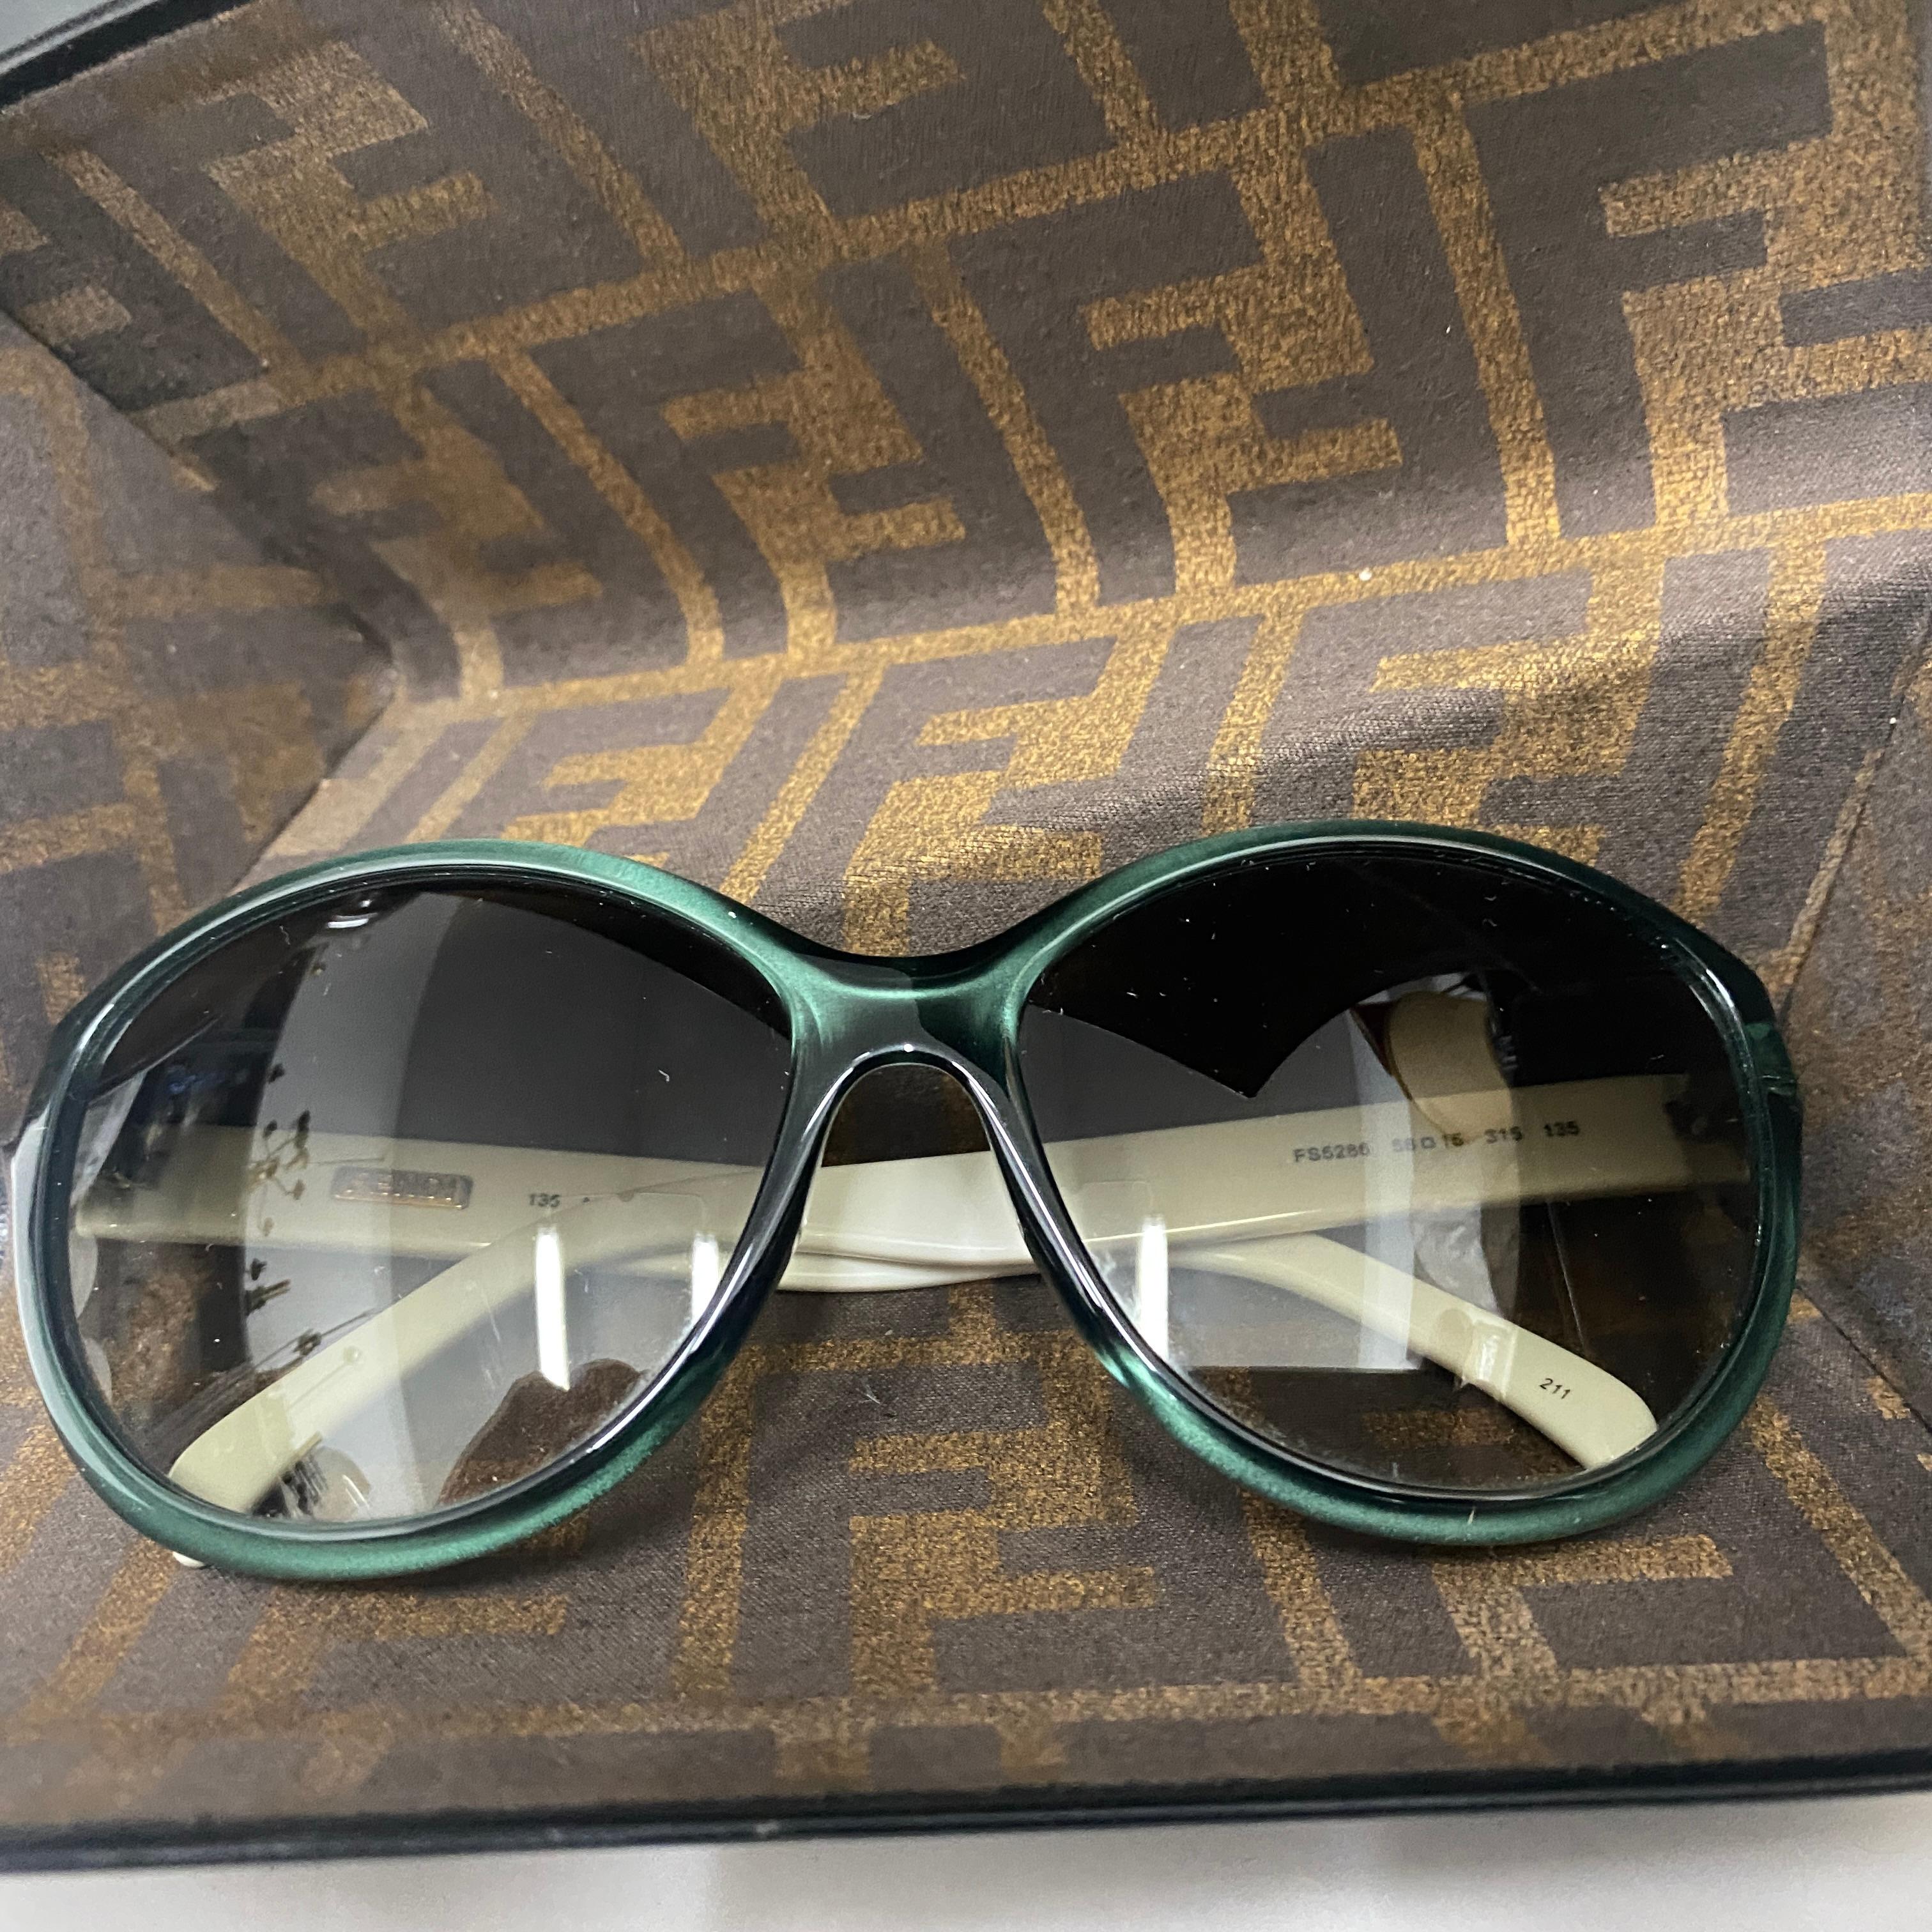 An amazing pair of sunglasses made in Italy in the Nineties by Fendi. they are in lovely conditions and in the original box.